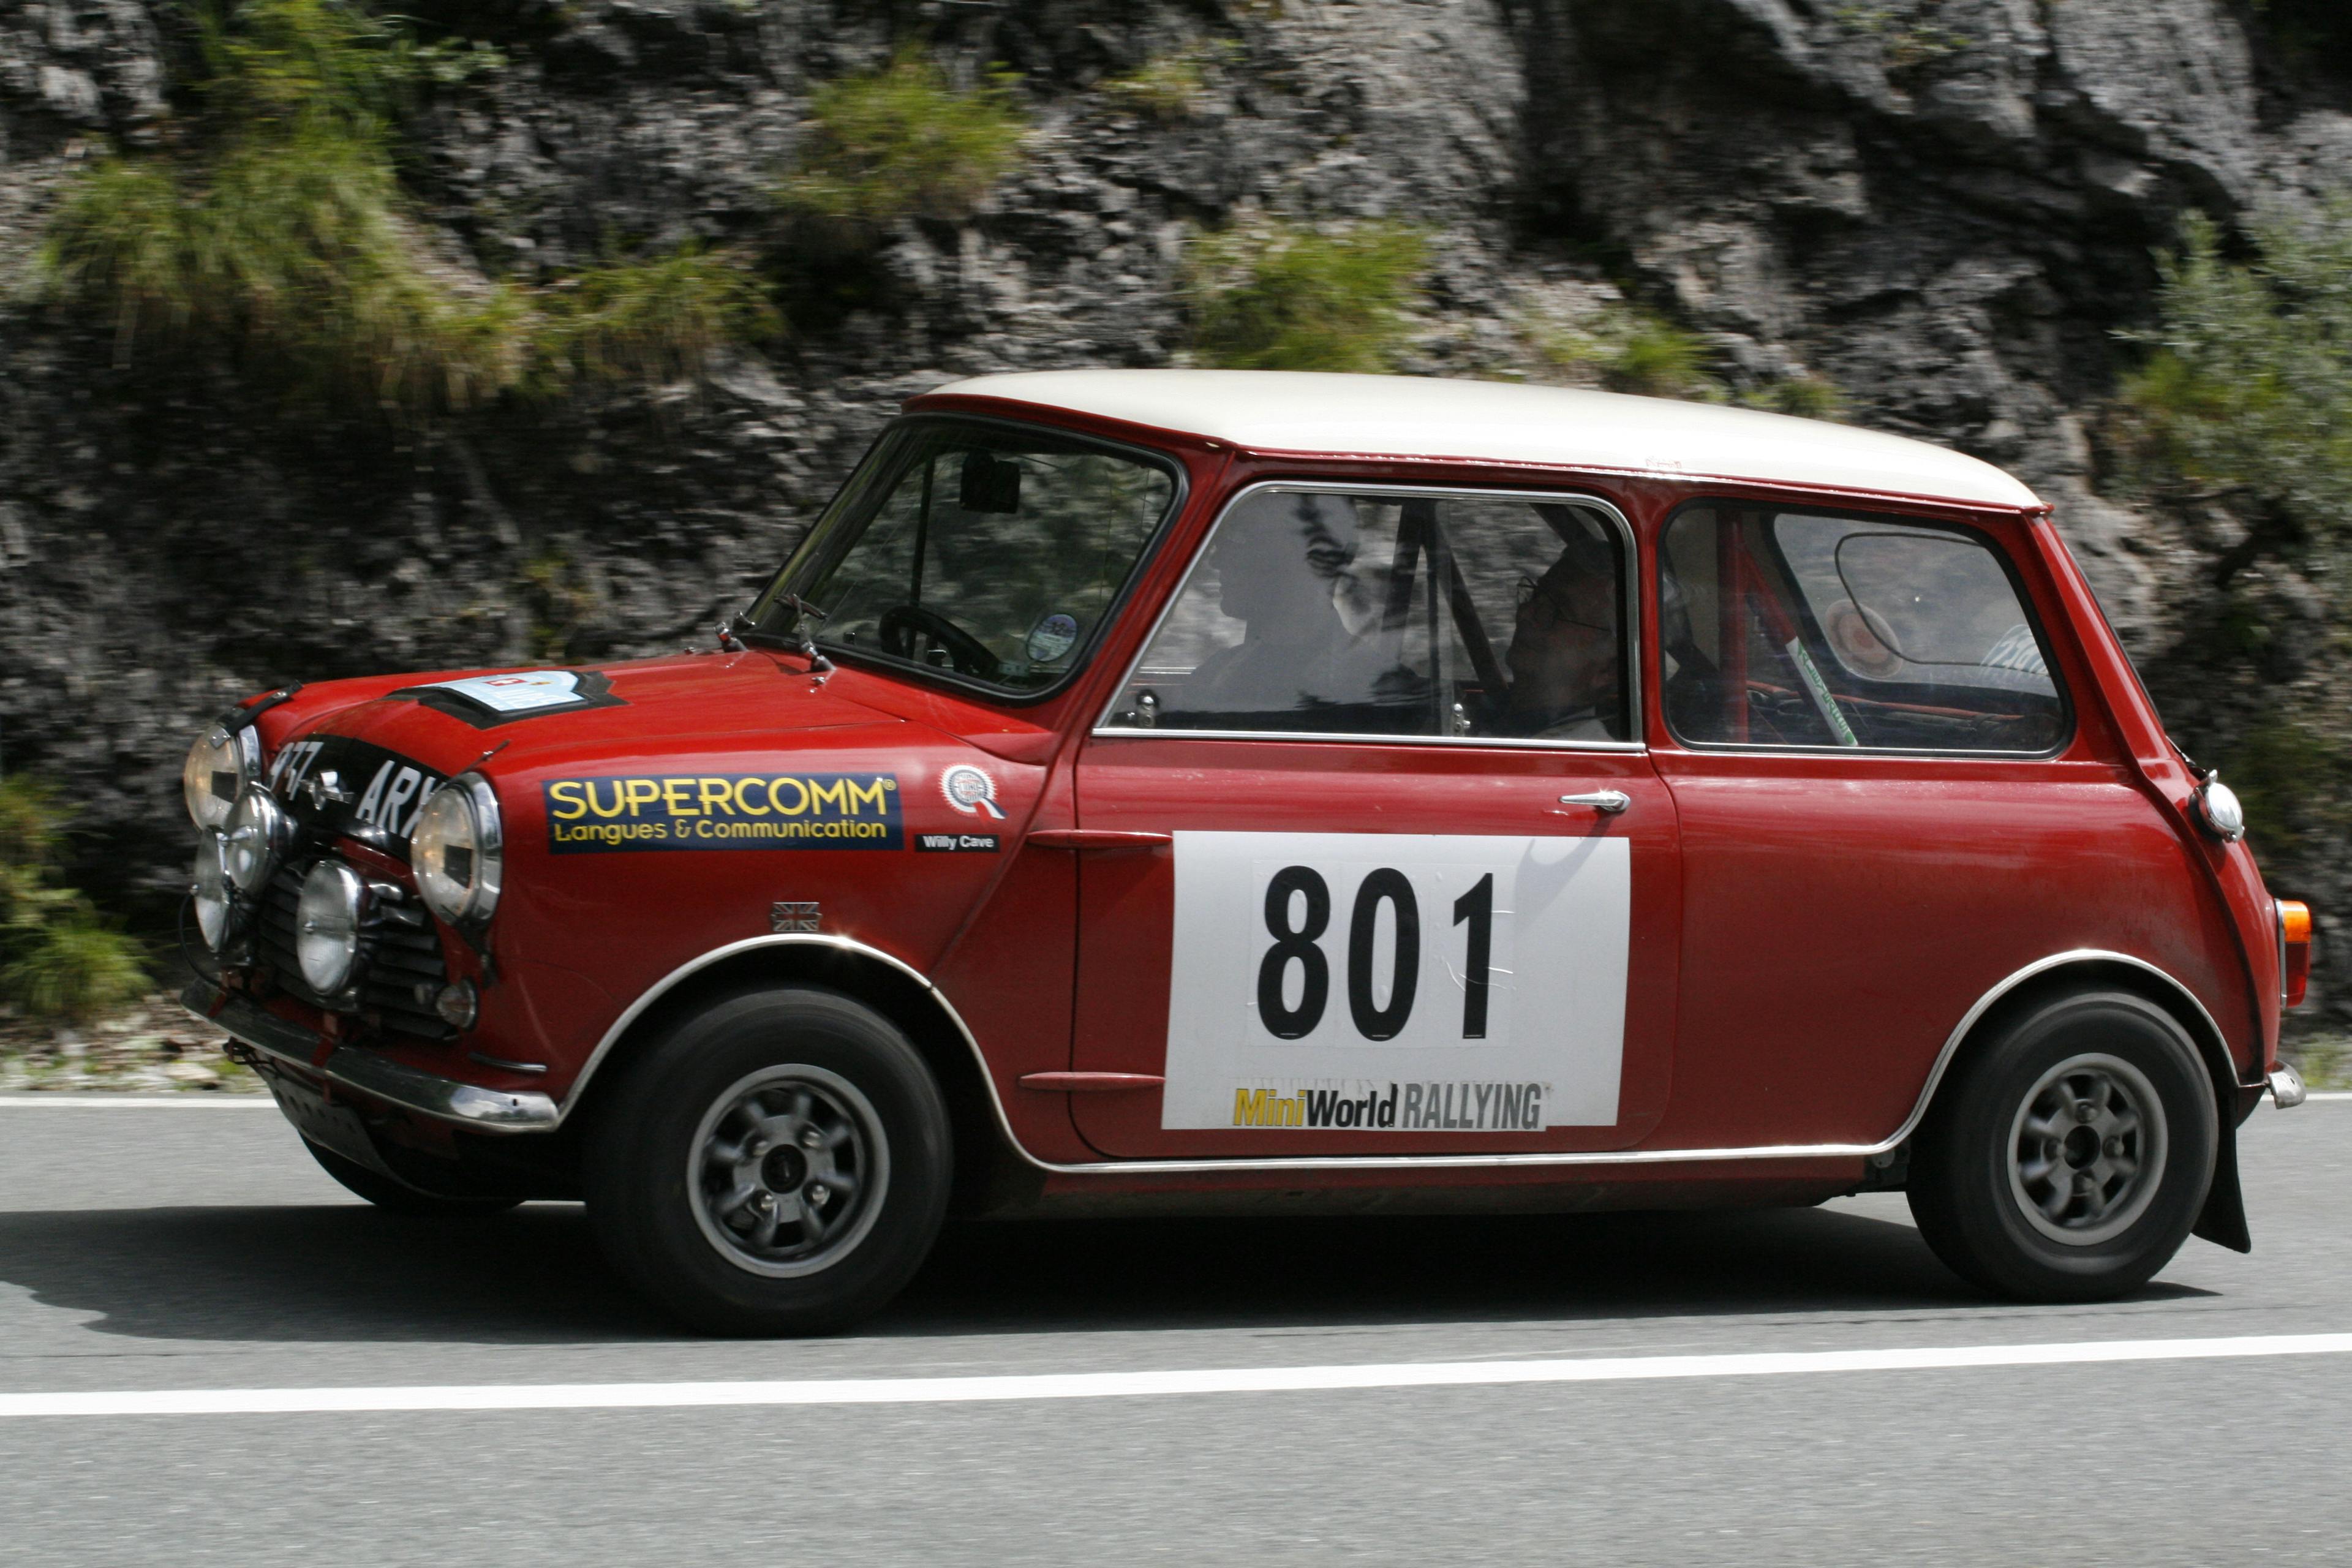 Peter Barker and co-driver Willy Cave speed onwards to the finish of the 2007 Rallye des Alpes in their 1962 Mini Cooper